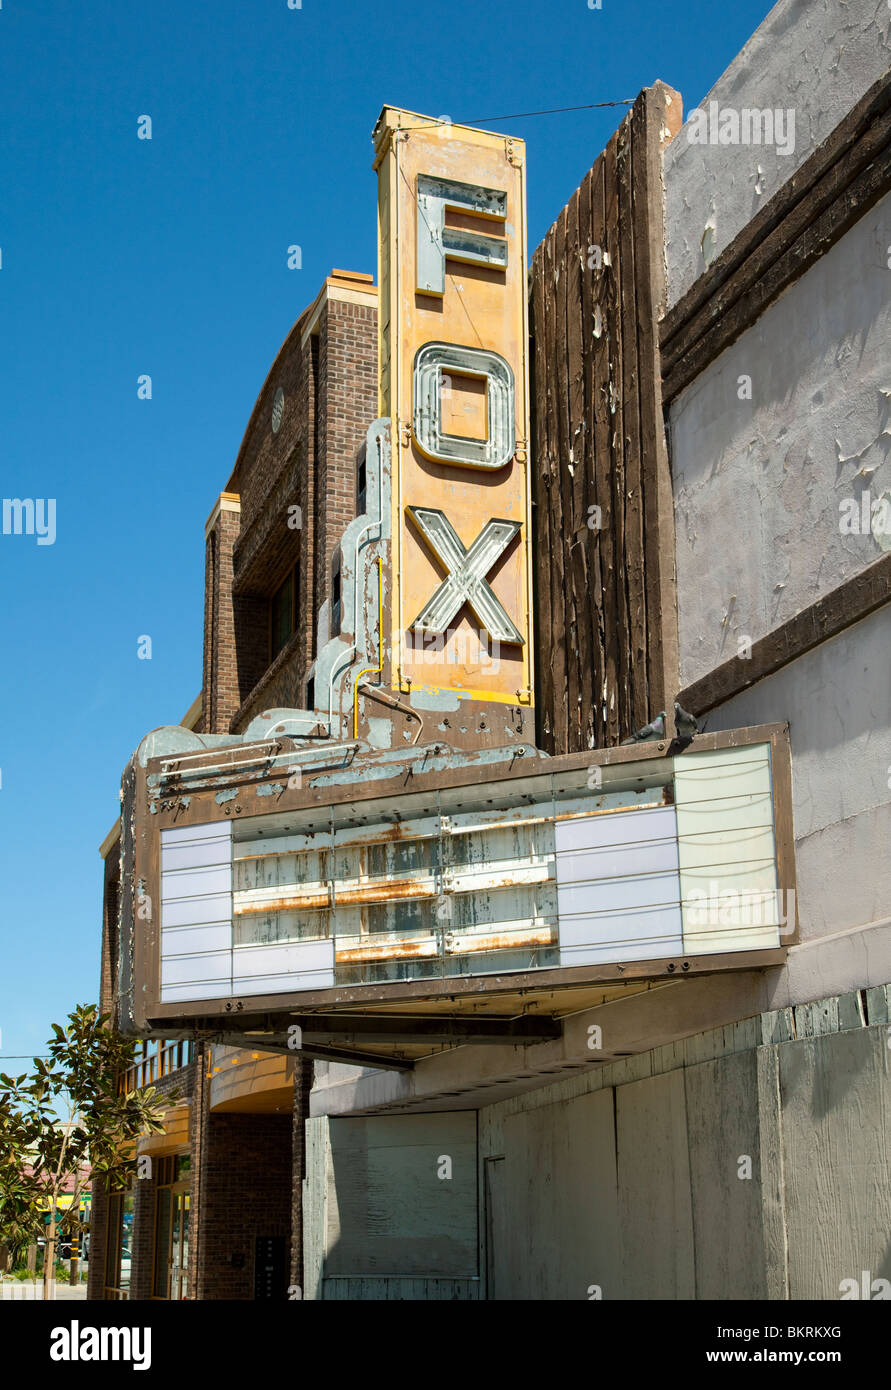 Marquee and sign of abandoned Fox theater in Paso Robles, CA Stock